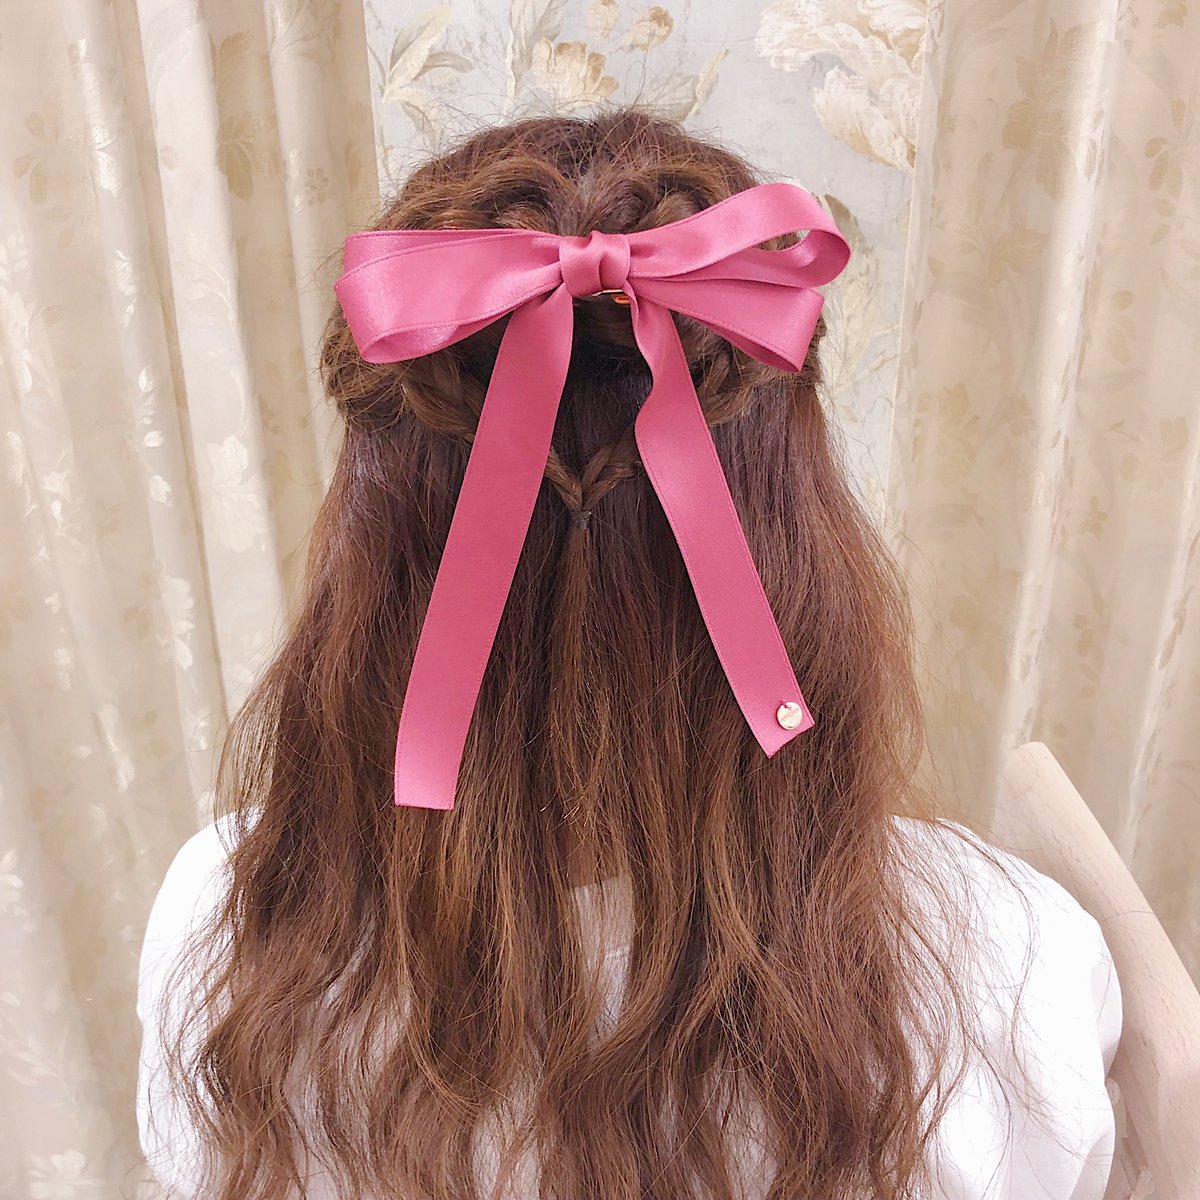 Evelyn On Twitter Evelyn 天神コア リボンバレッタをヘアアレンジ